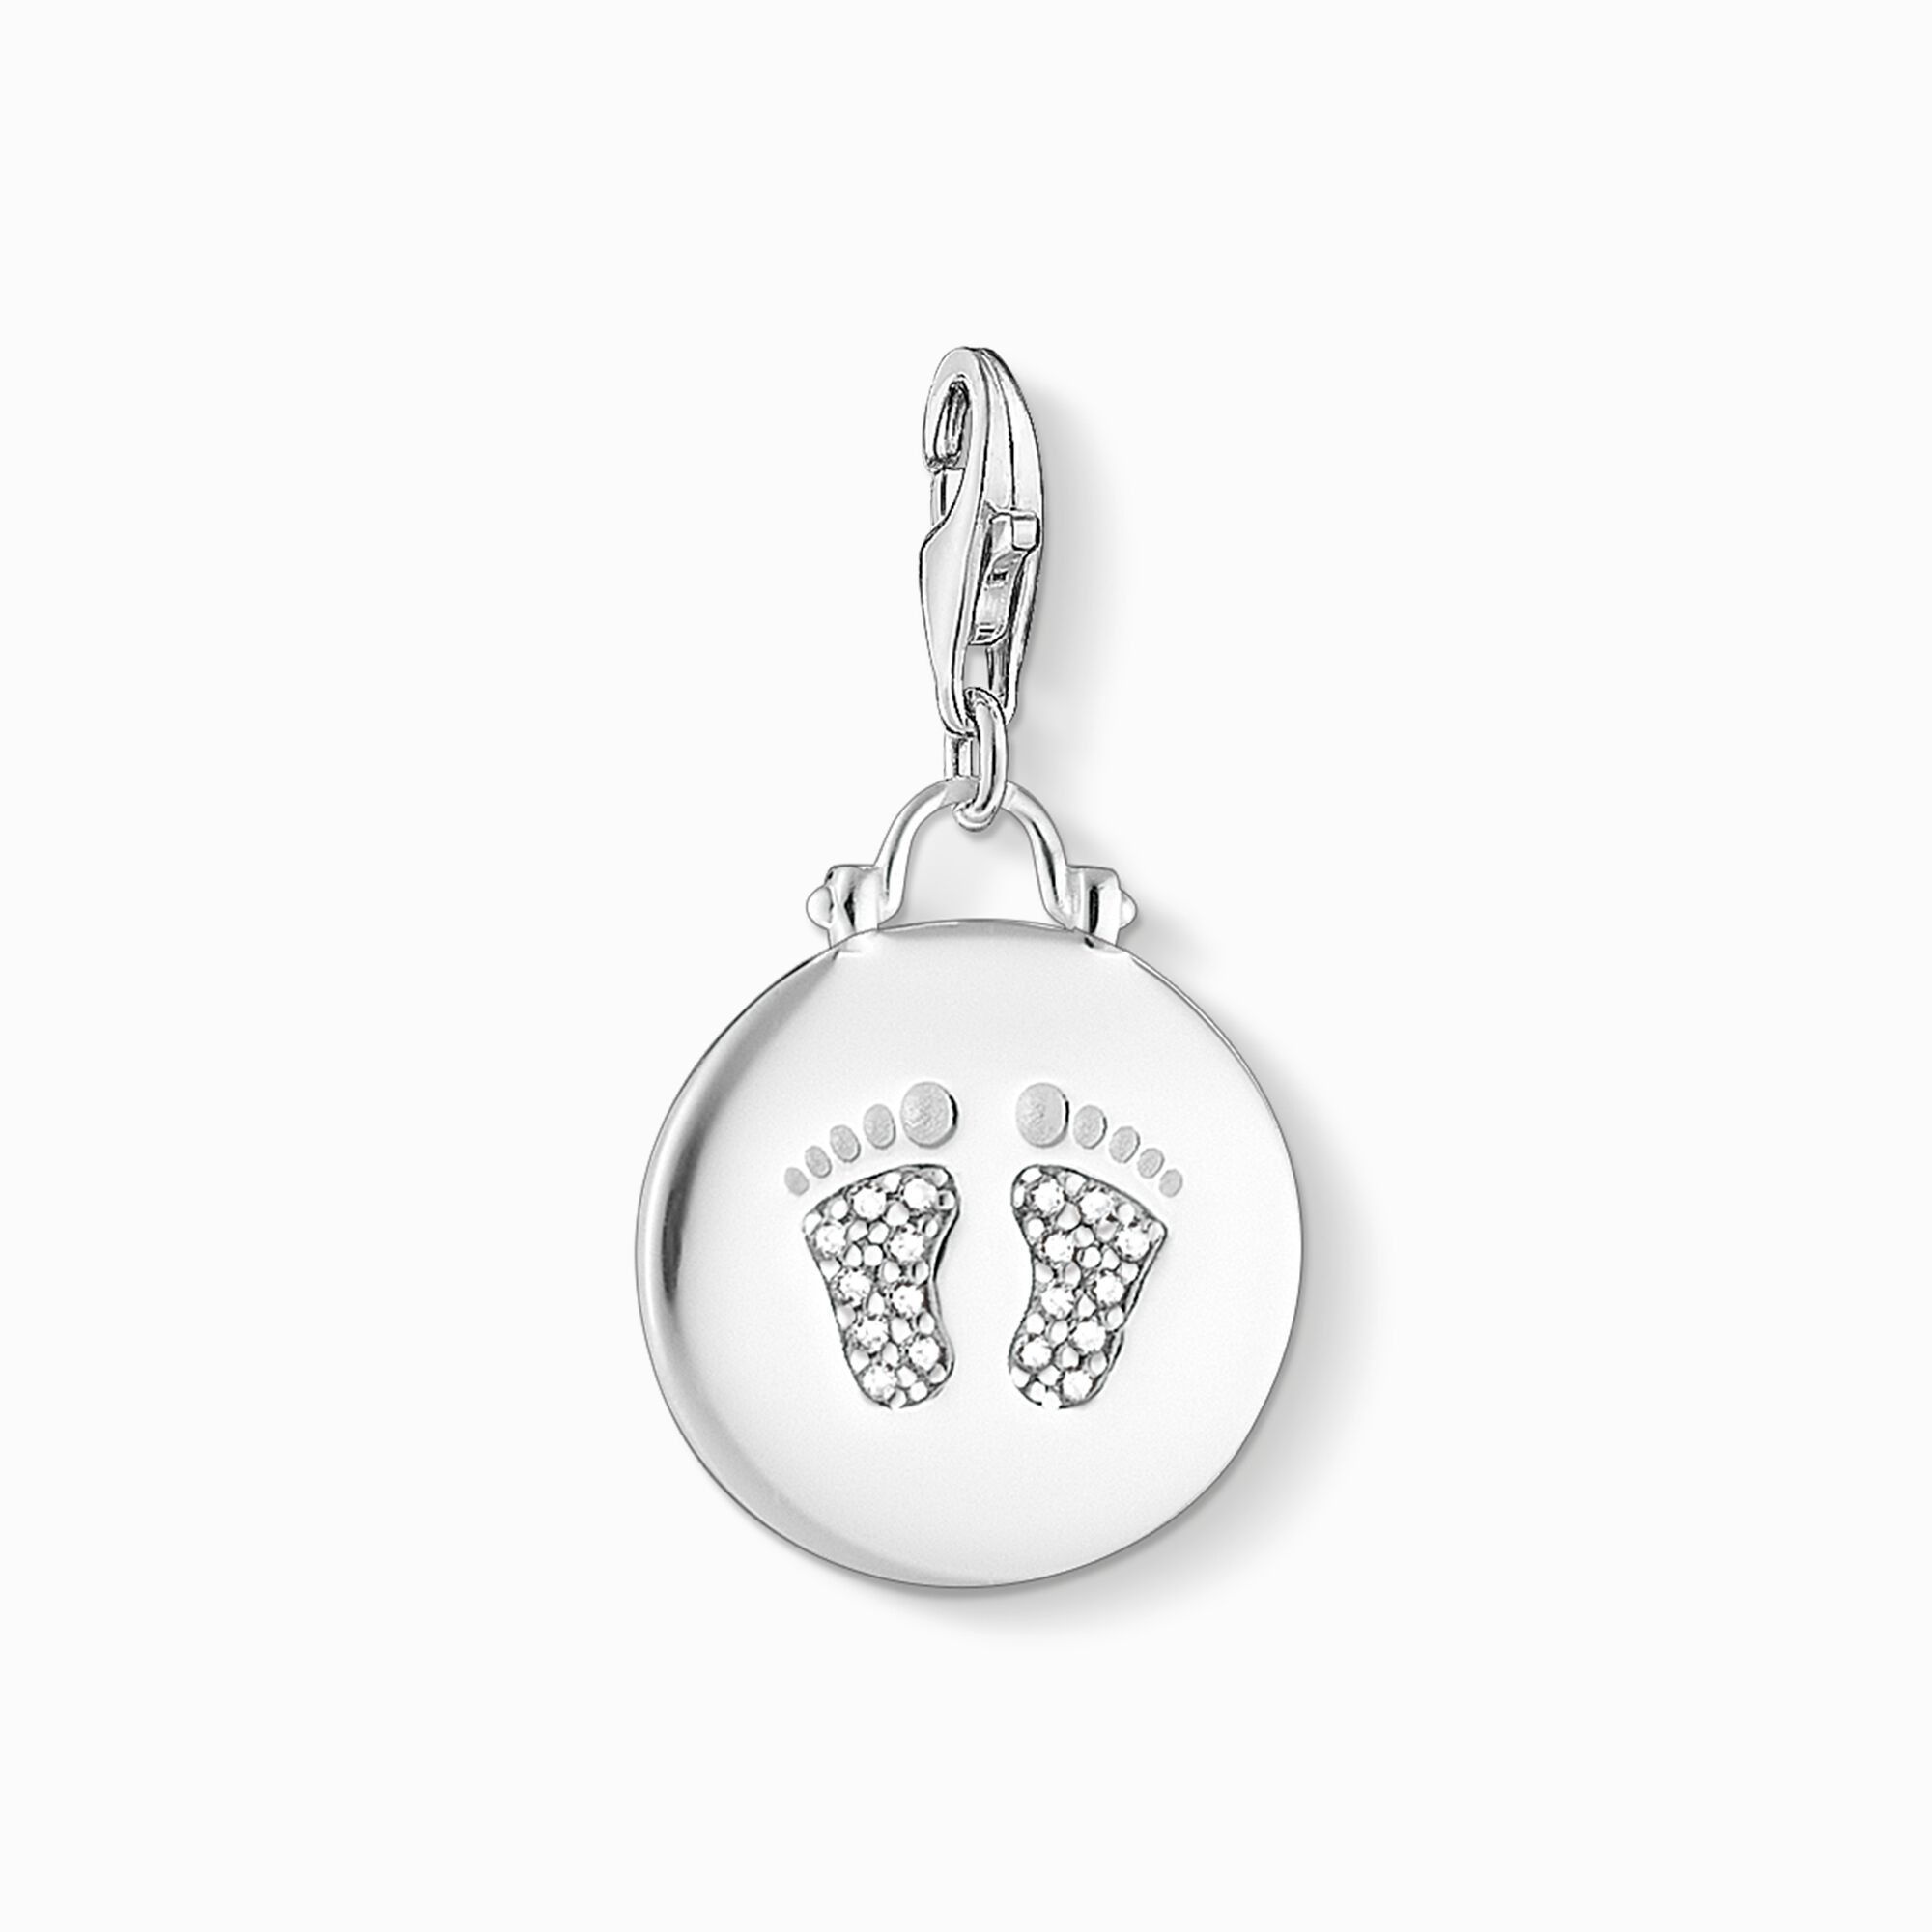 Charm pendant disc baby footprint from the Charm Club collection in the THOMAS SABO online store